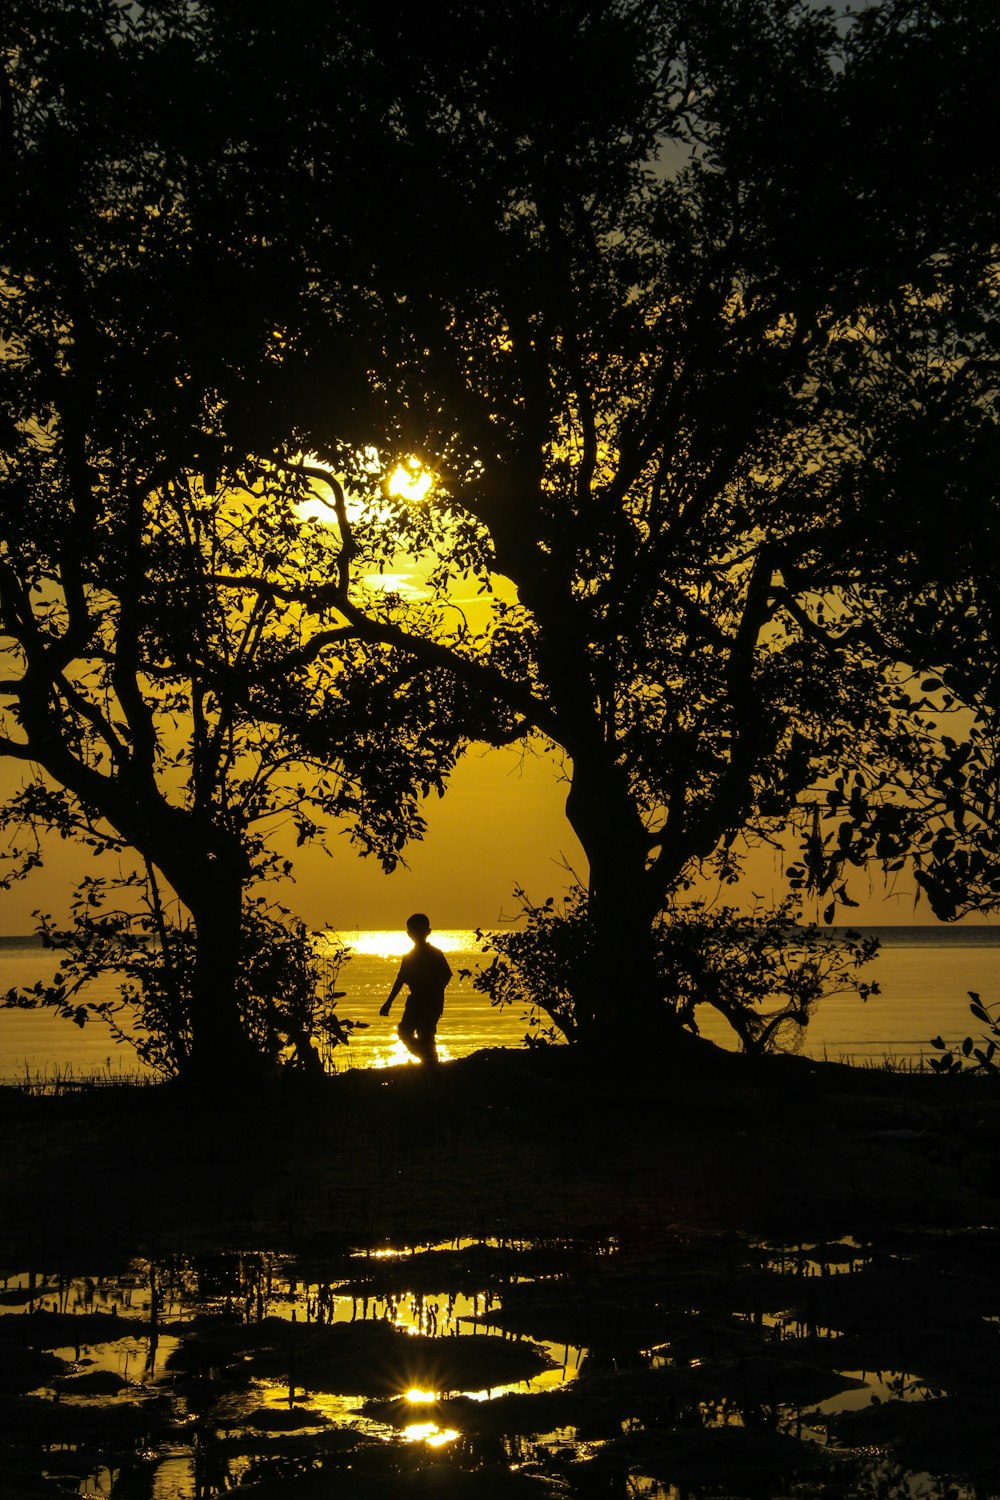 silhouette of boy standing near body of water during golden hour